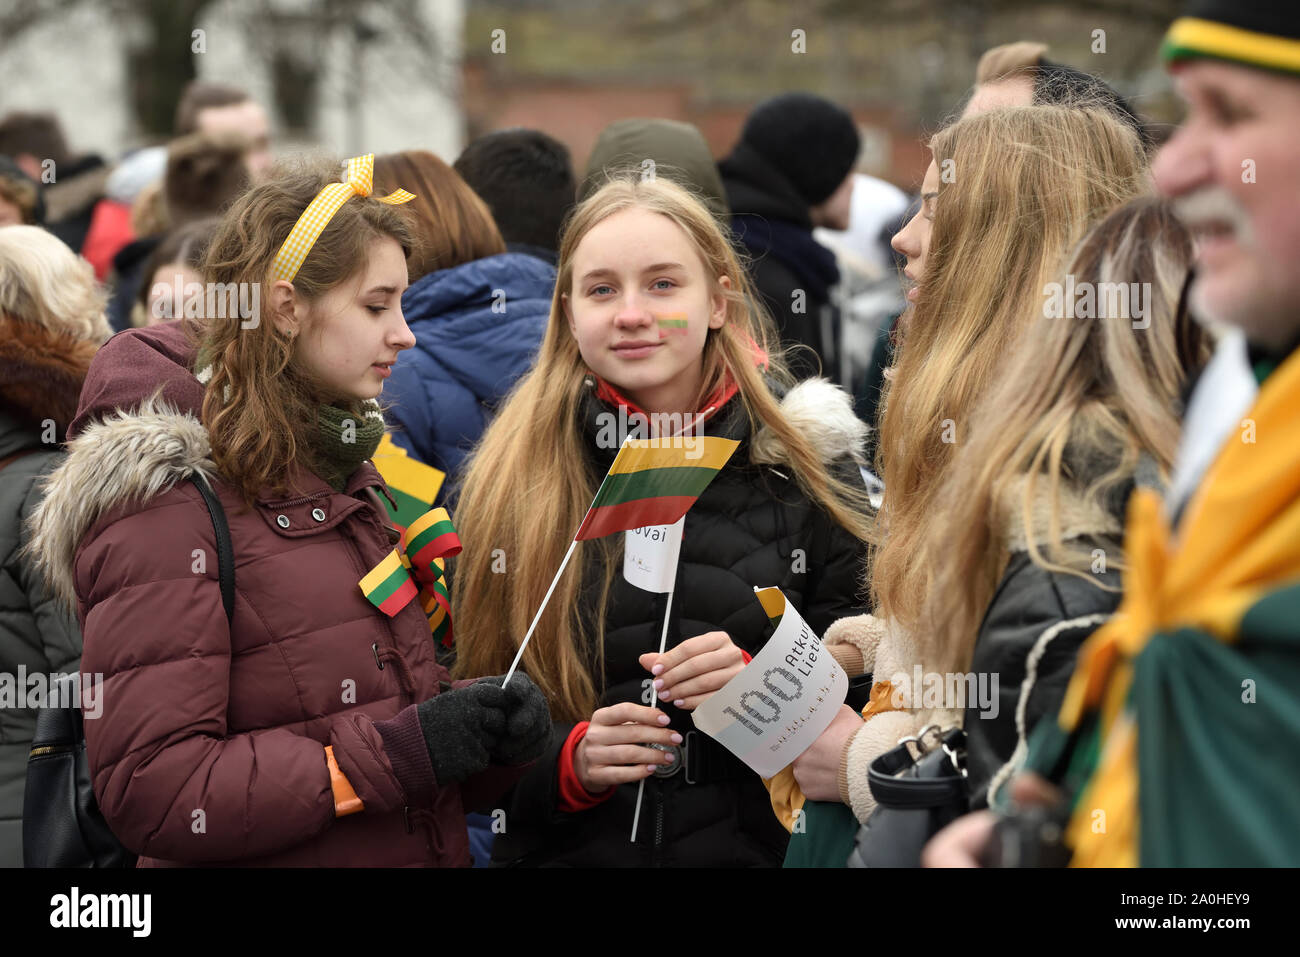 Vilnius, Lithuania - February 16: unidentified people gathered with flags in a natonal celebration for the Day of Independence of Lithuania on Februar Stock Photo